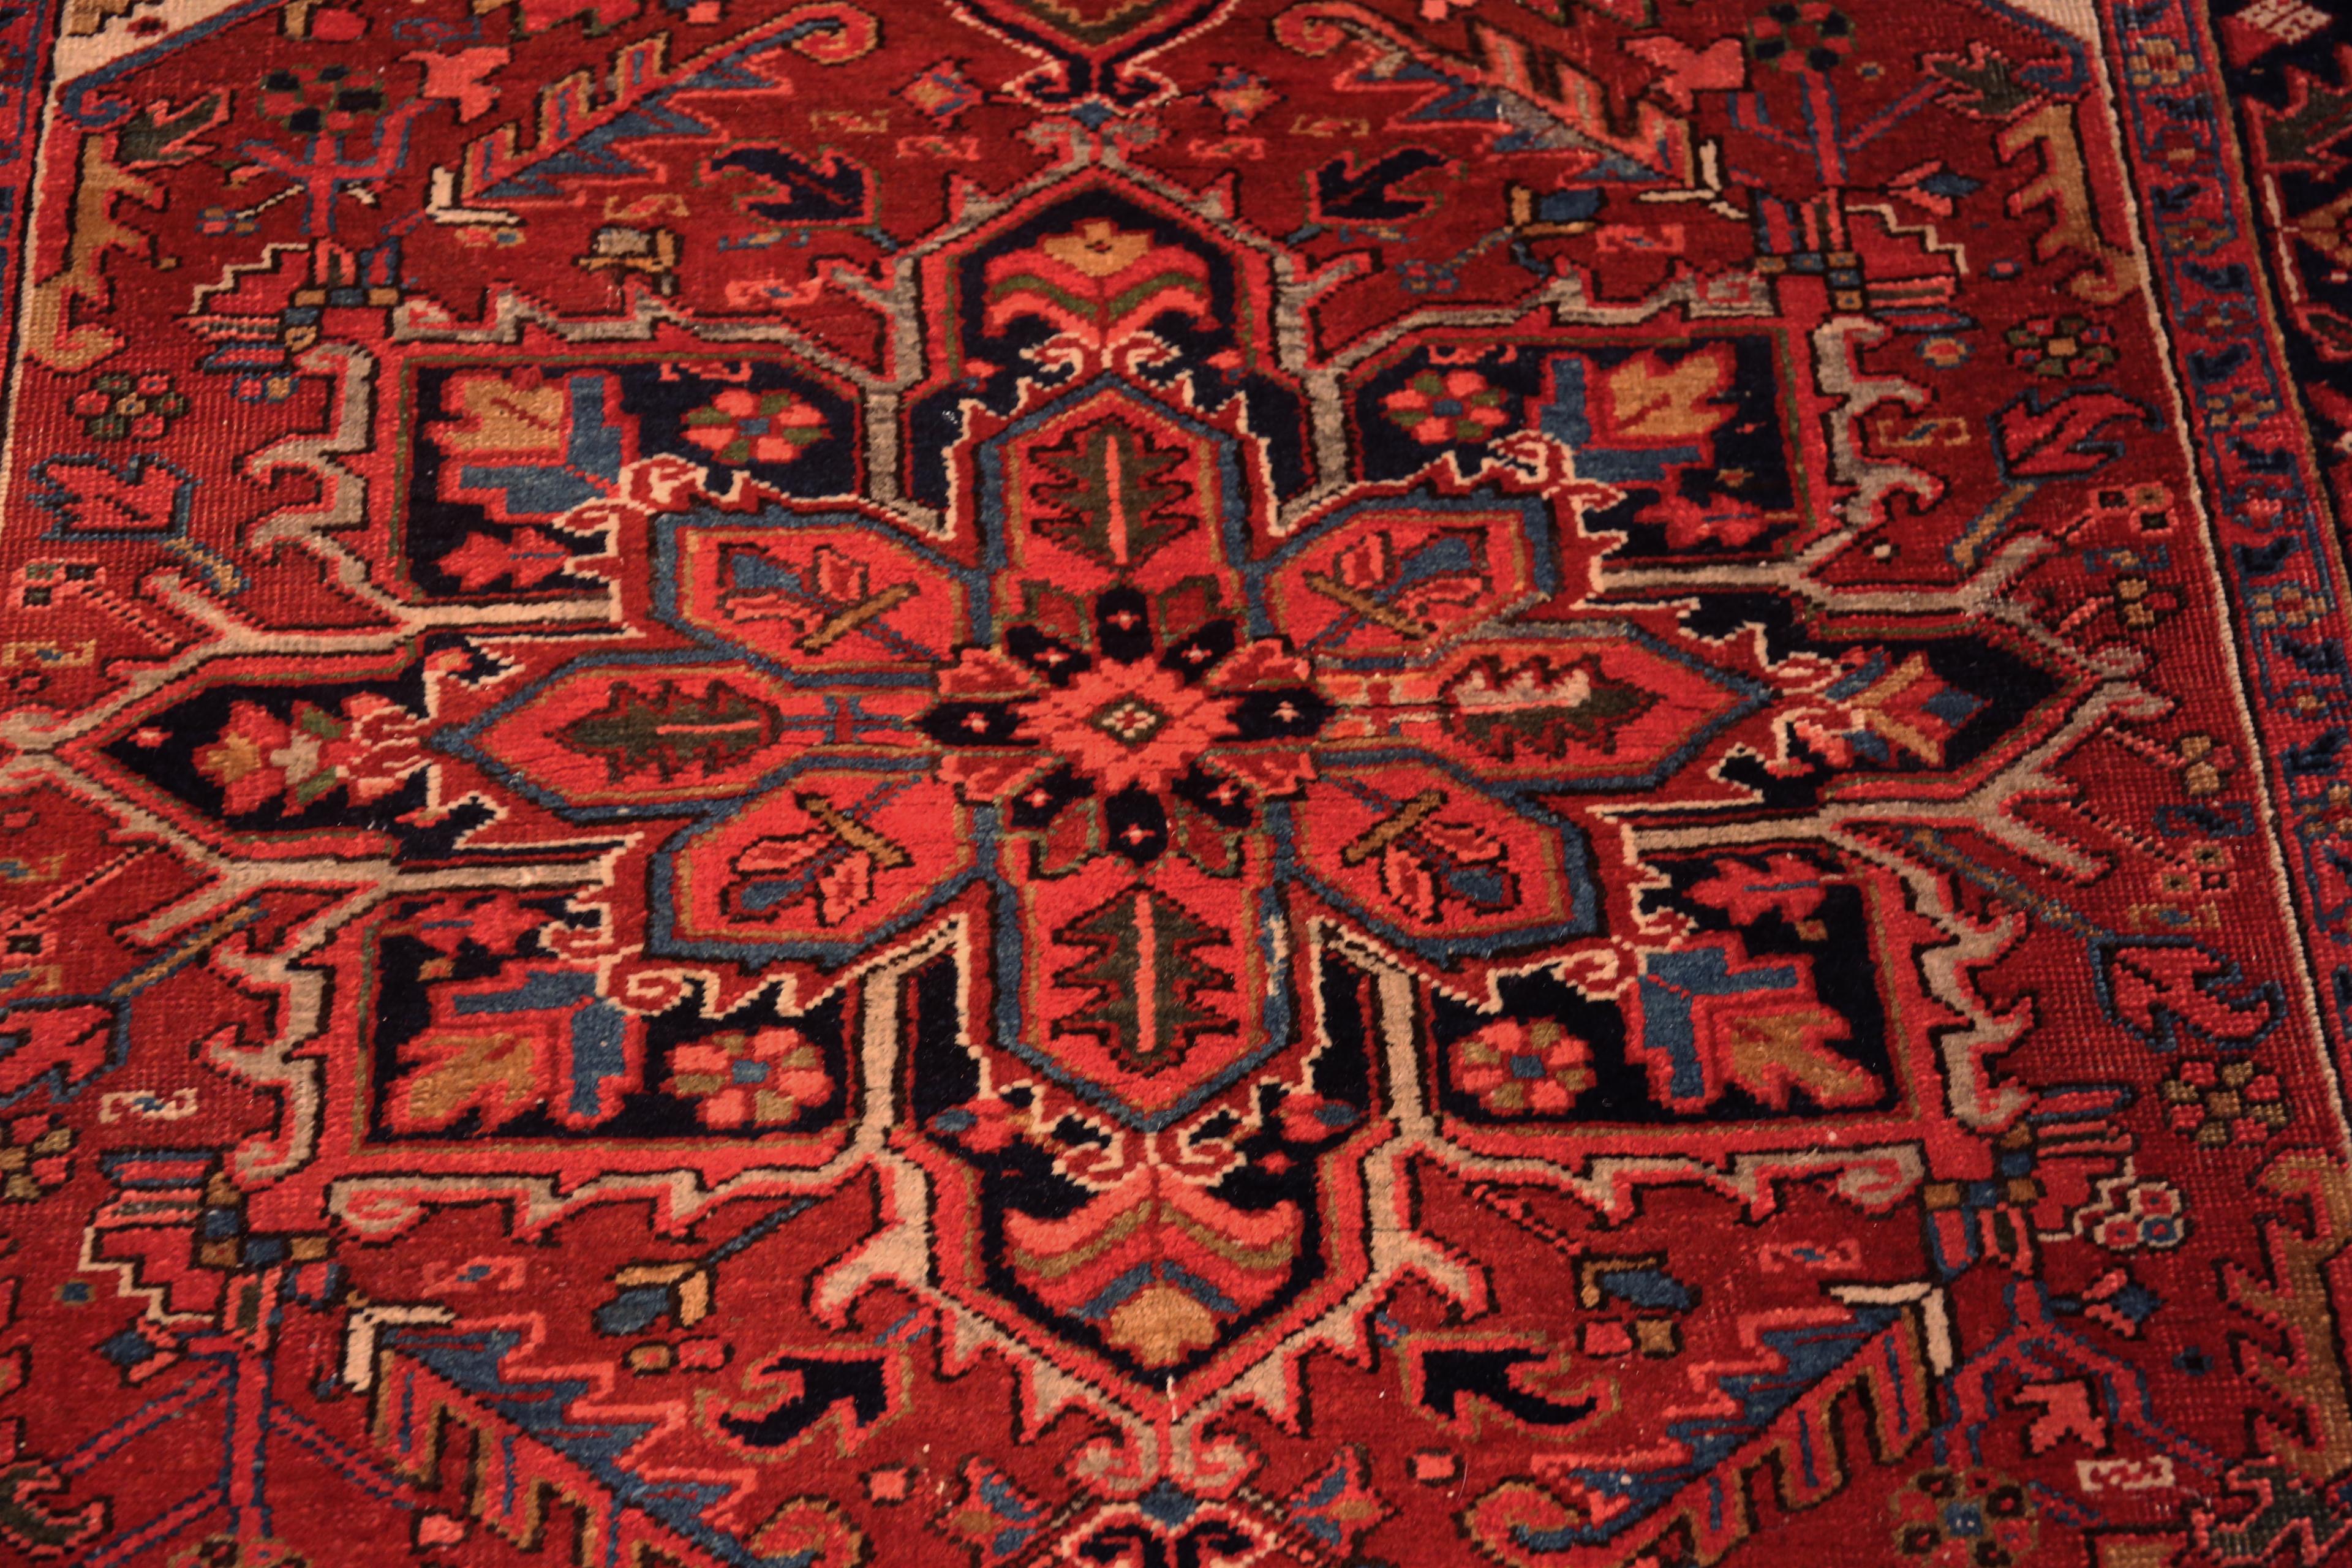 Hand-Knotted Amazing Small Geometric Medallion Antique Persian Heriz Area Rug 5' x 6'6